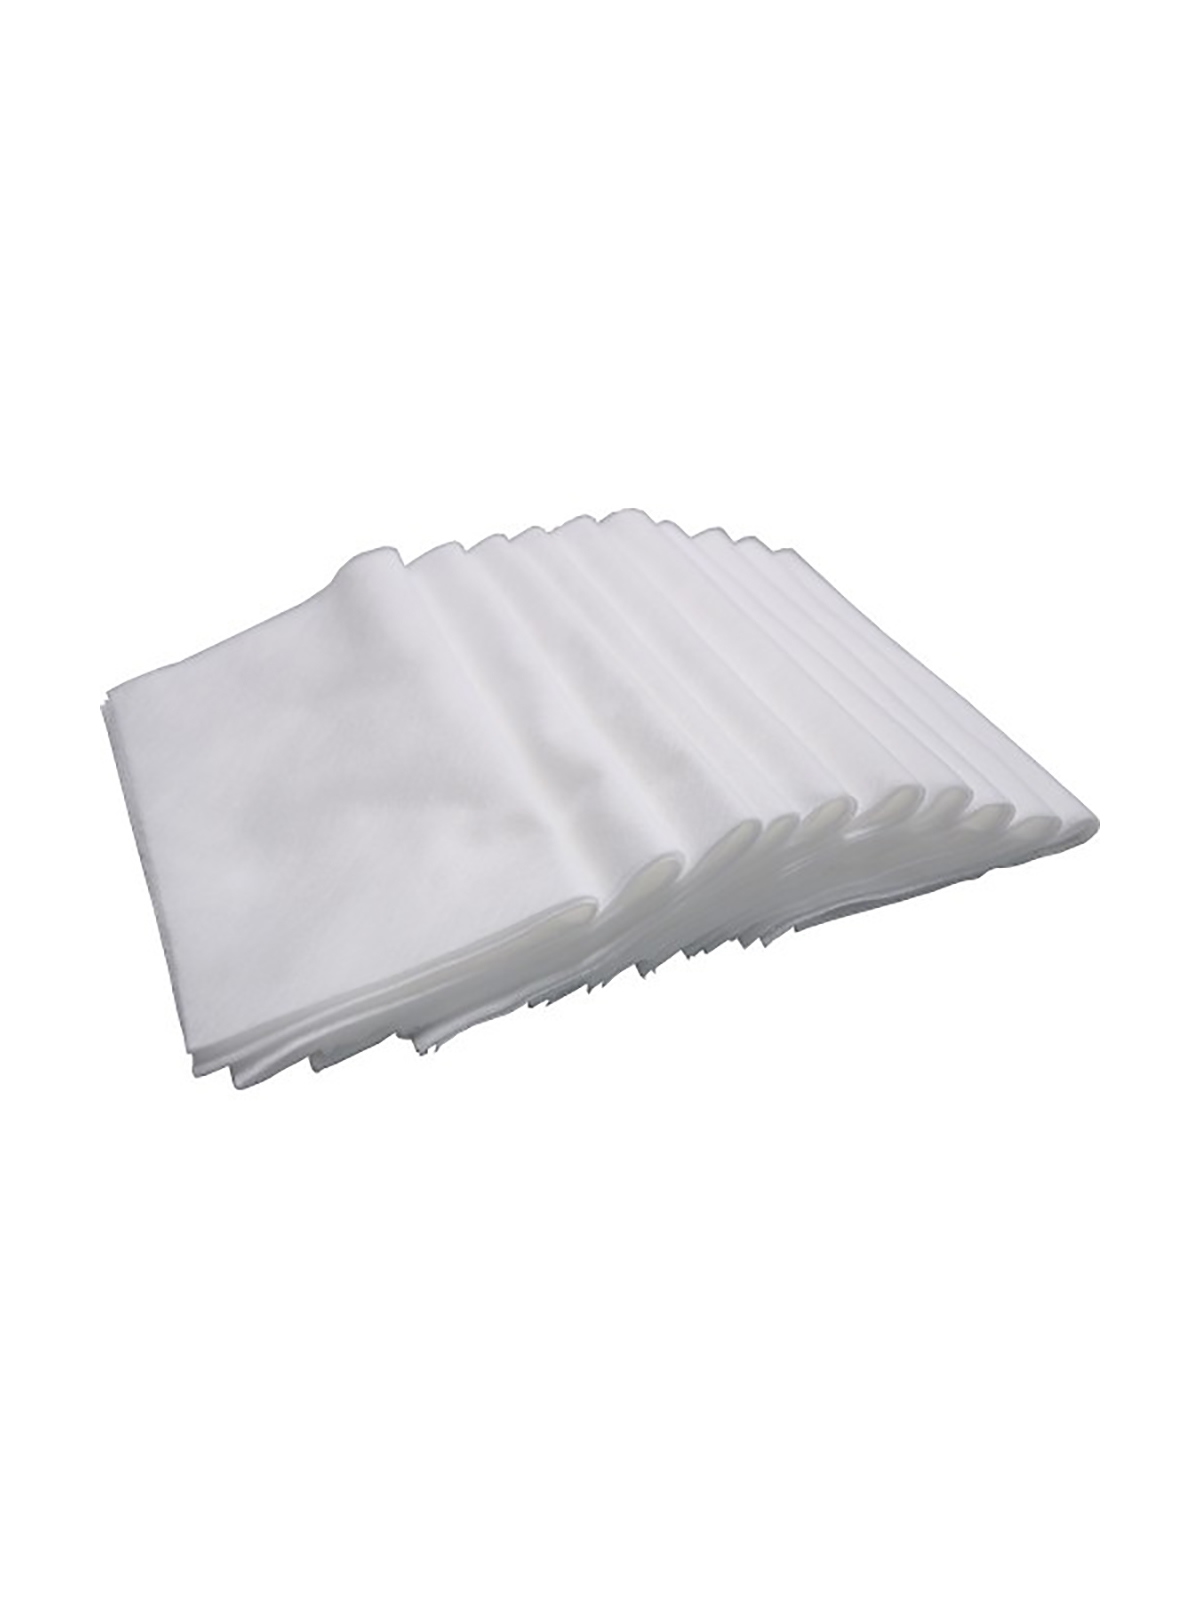 ROTWEISS Fleece Cloth - white, 12.6" x 15", Pack of 10